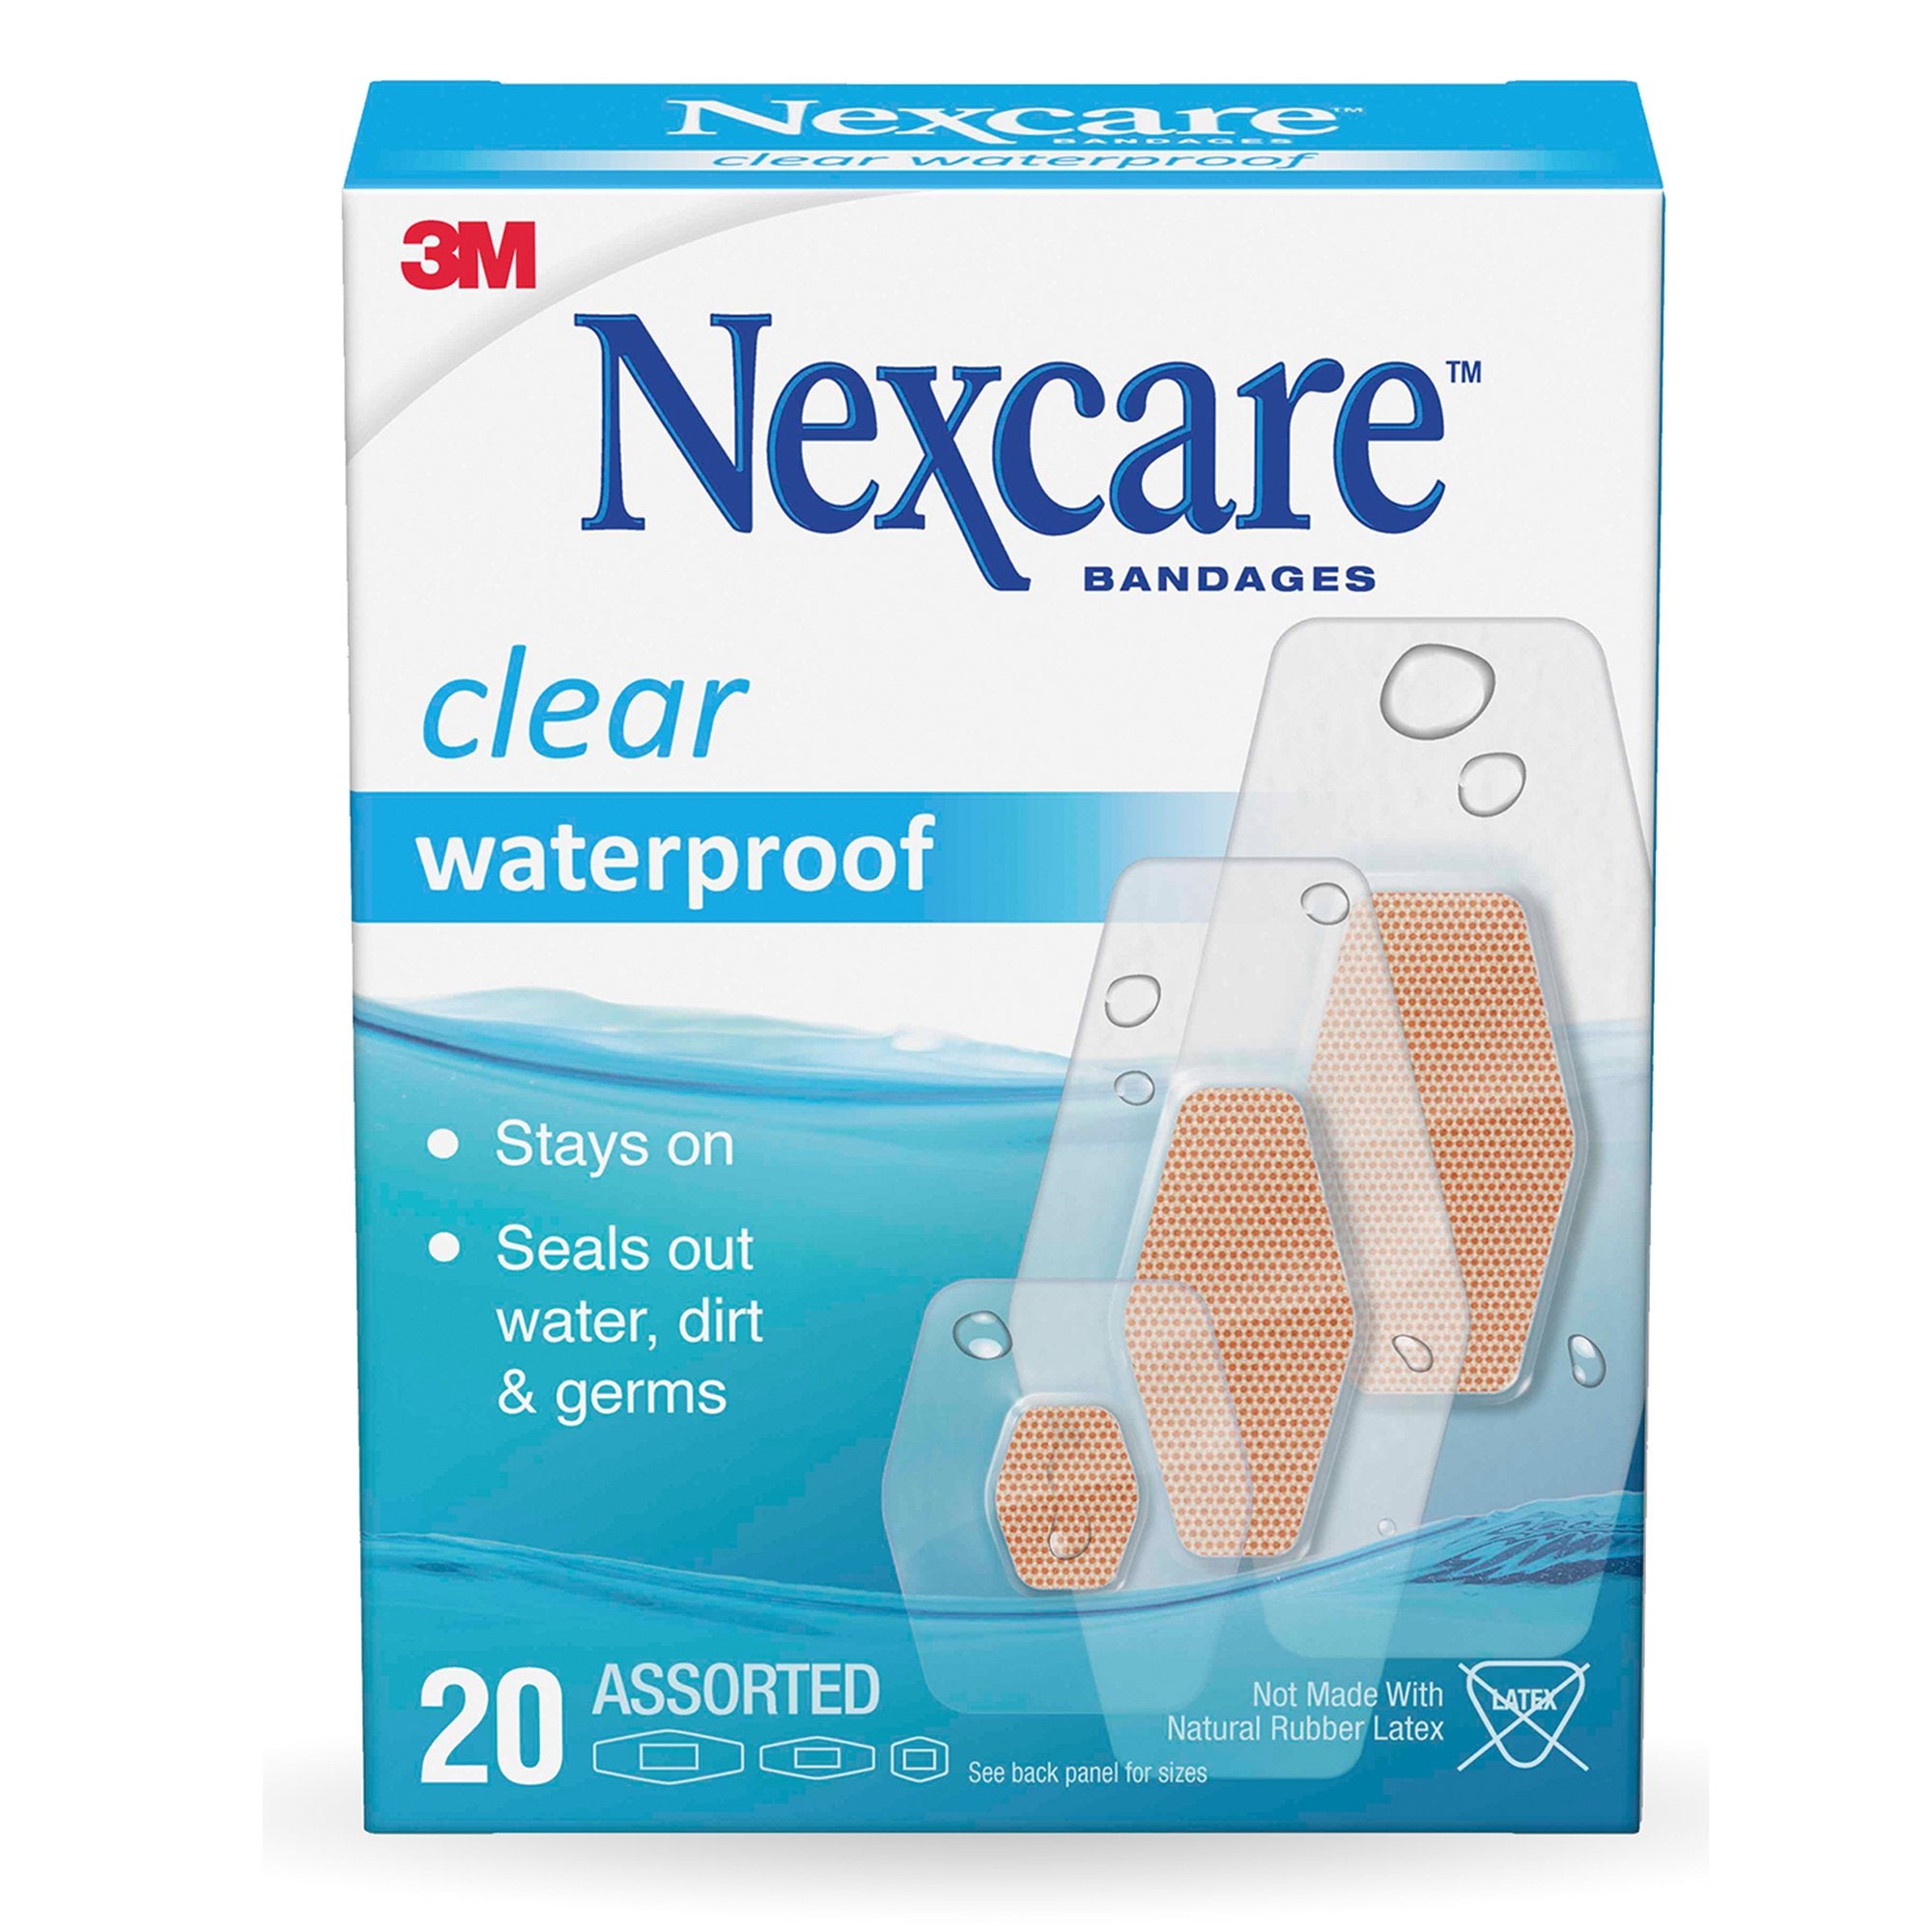 Adhesive Strip 3M Nexcare™ 7/8 X 1-1/16 Inch / 1-1/4 X 2-1/2 Inch / 1-1/16 X 2-1/4 Inch Plastic Rectangle Sheer Sterile